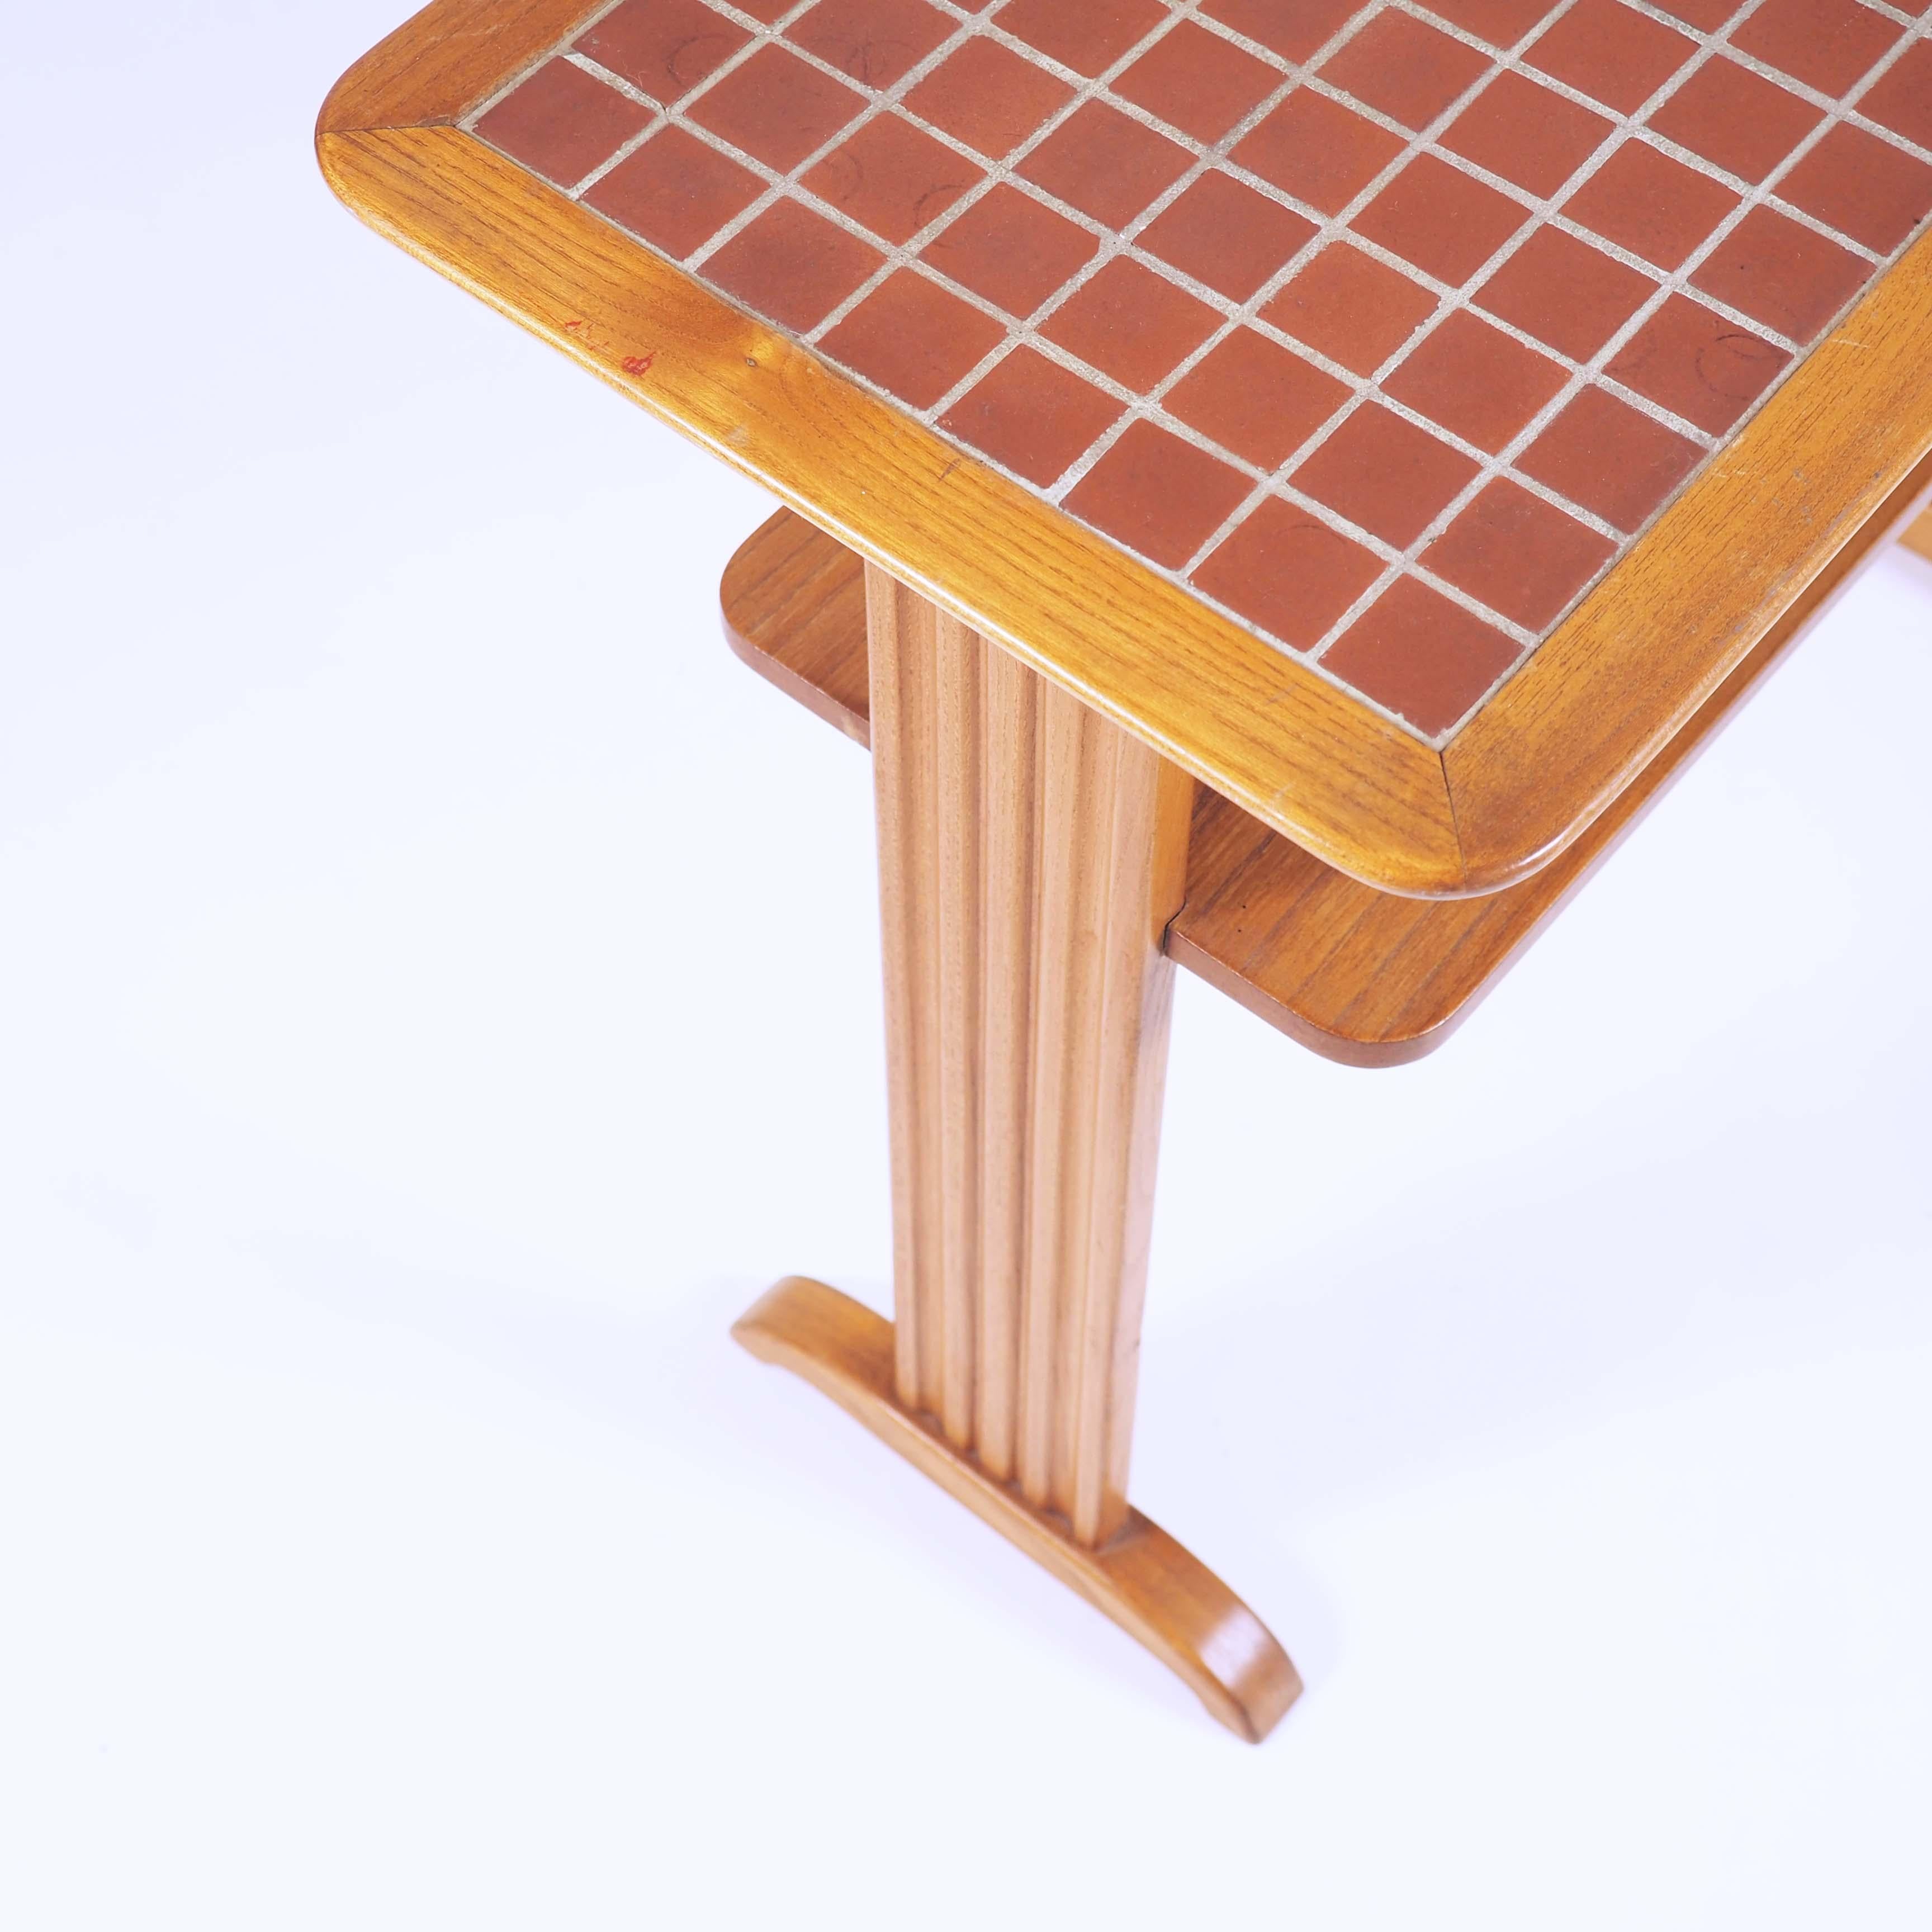 This small table in elmwood and terracotta mosaic (Called 